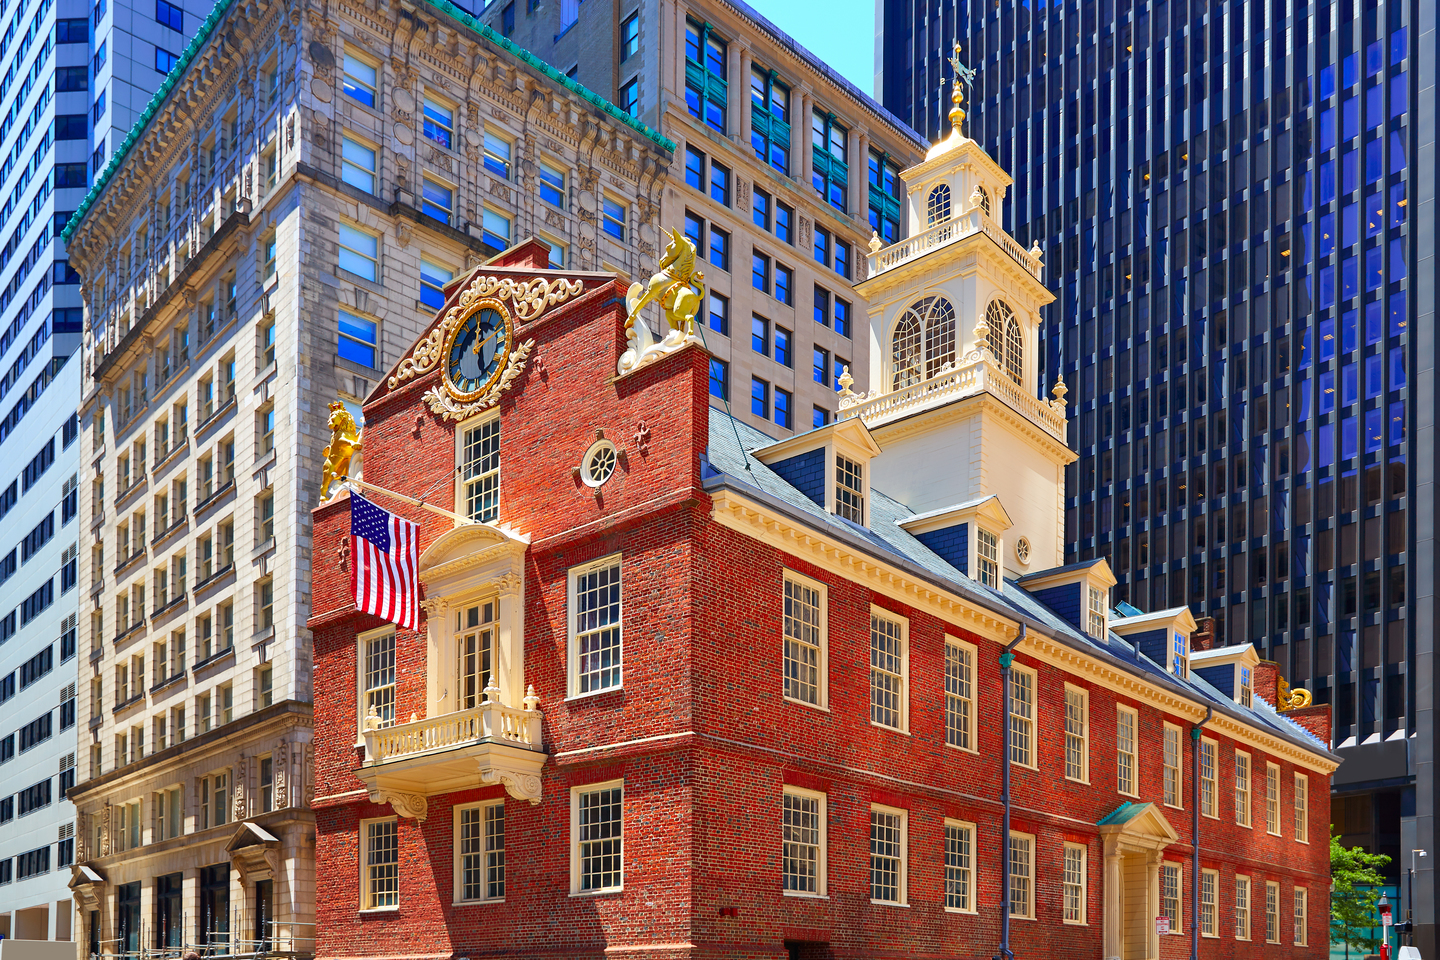 Old State House building in Boston